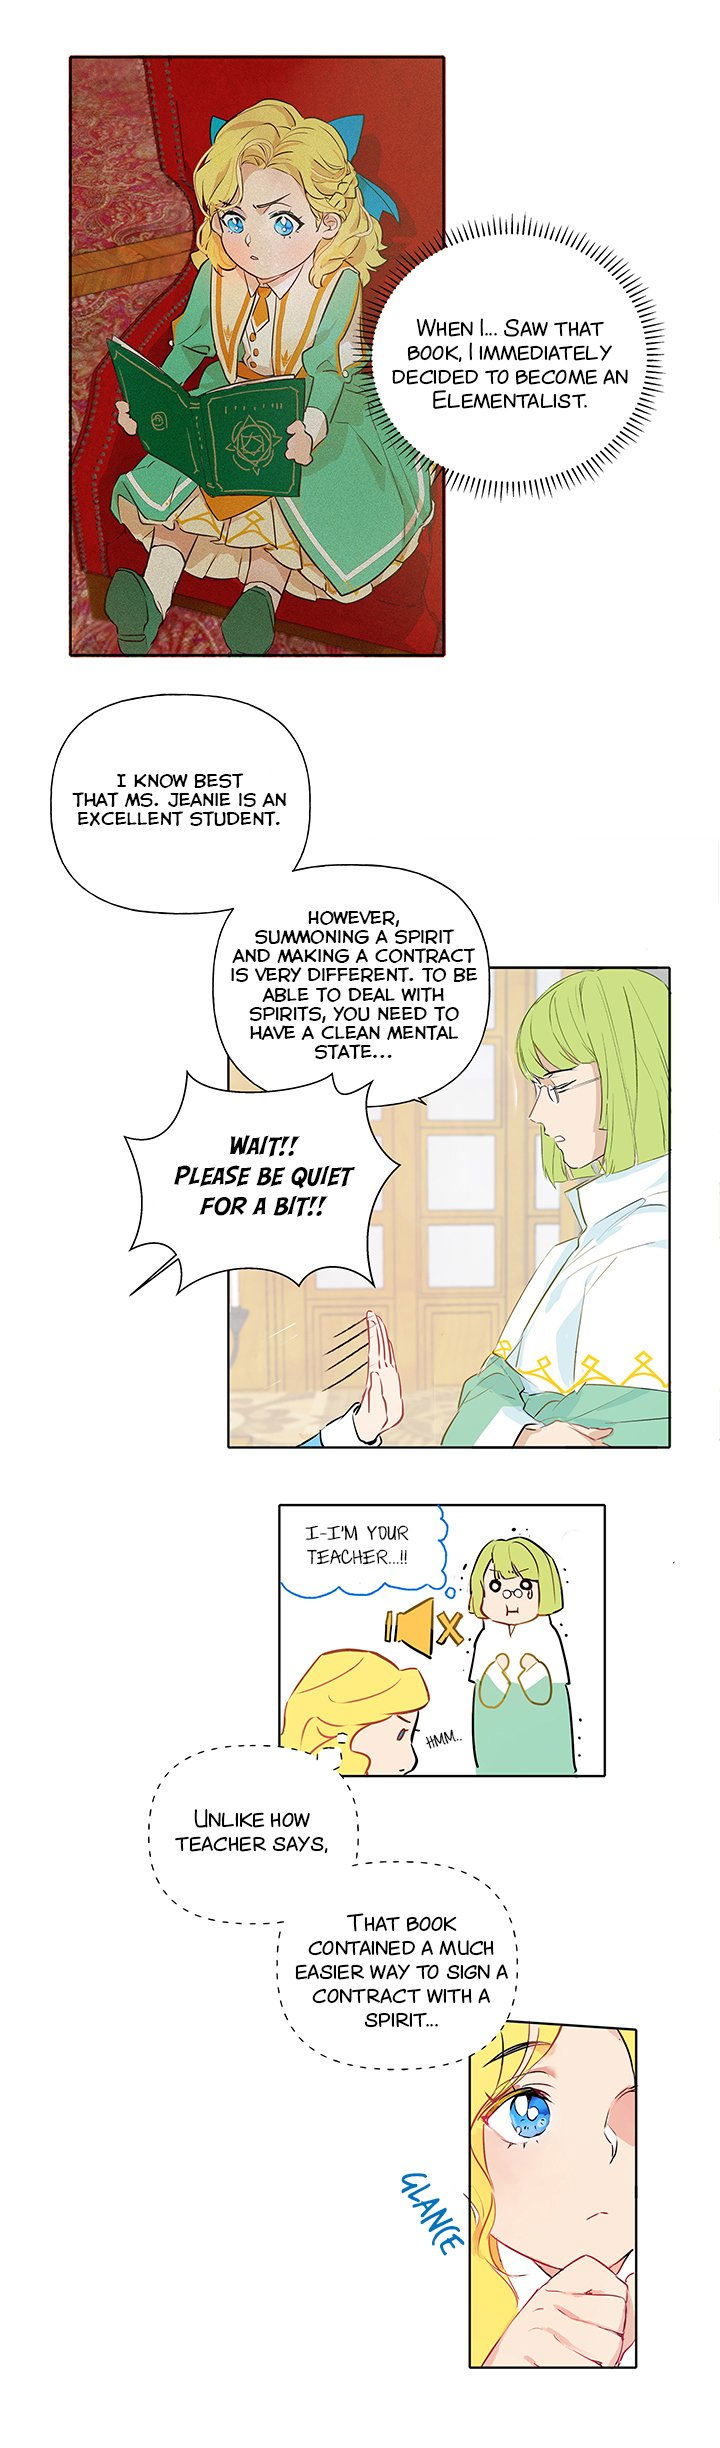 the-golden-haired-elementalist-chap-3-23